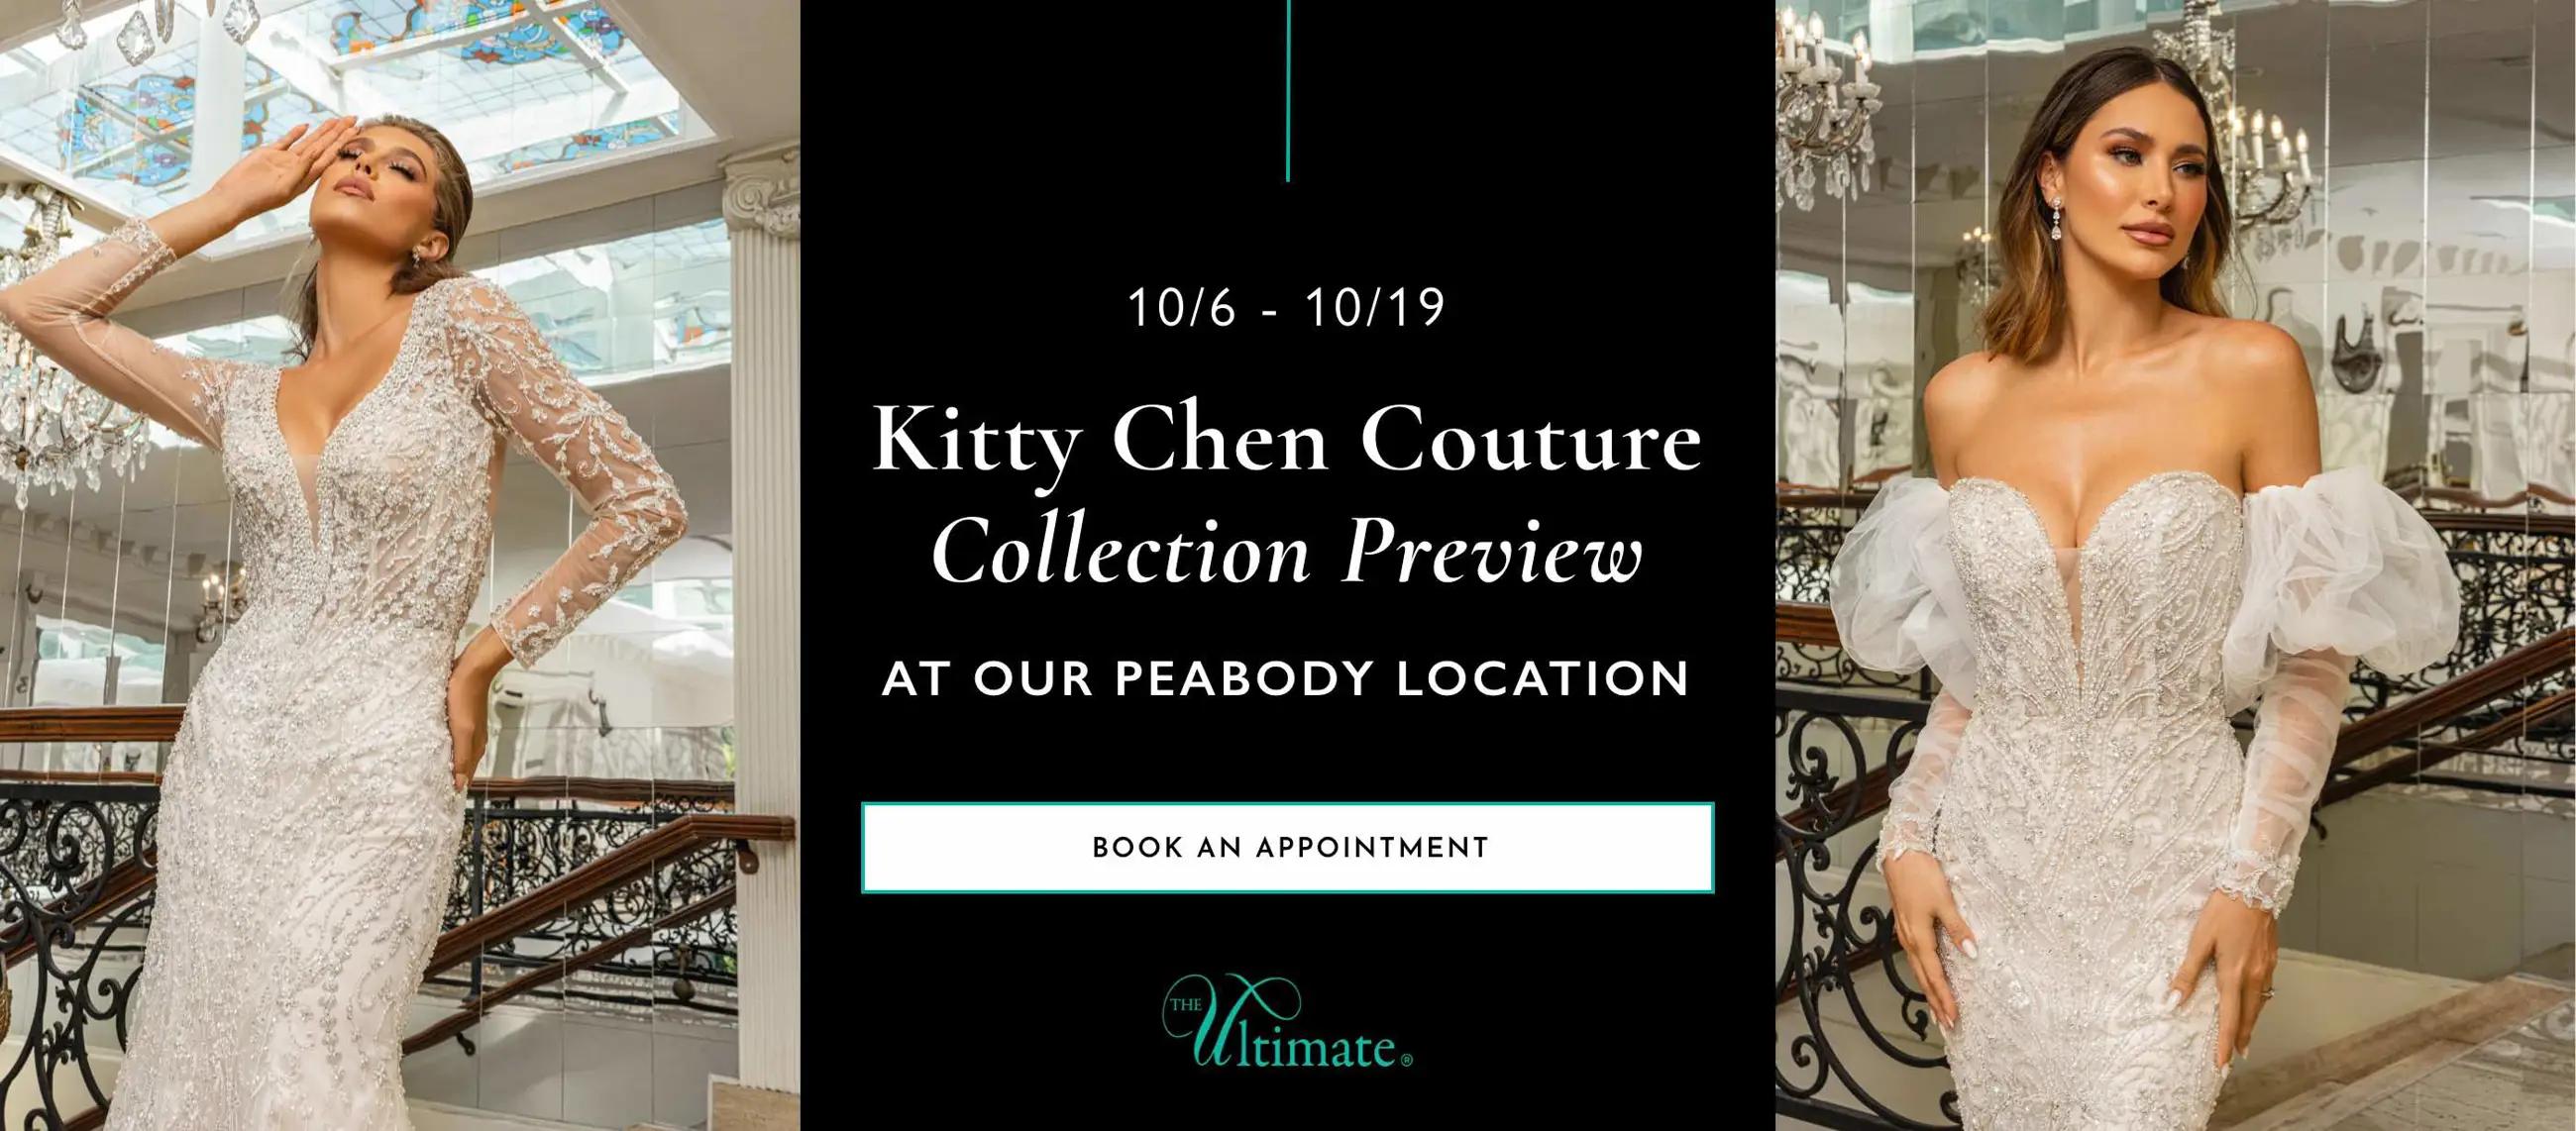 Kitty Chen Couture bridal collection preview at The Ultimate Peabody